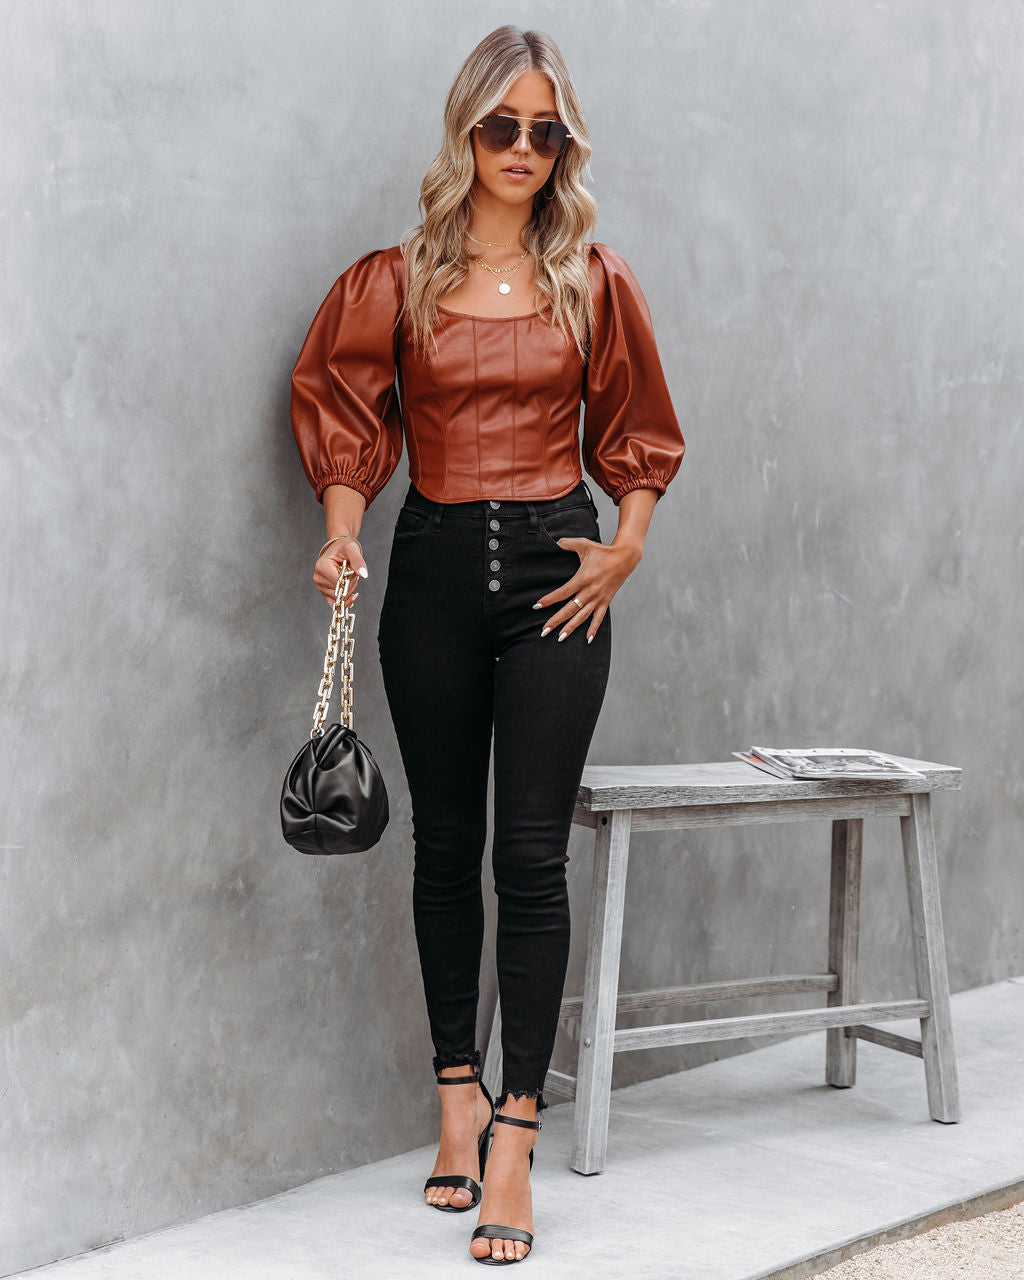 Jacklyn Faux Leather Puff Sleeve Crop Top